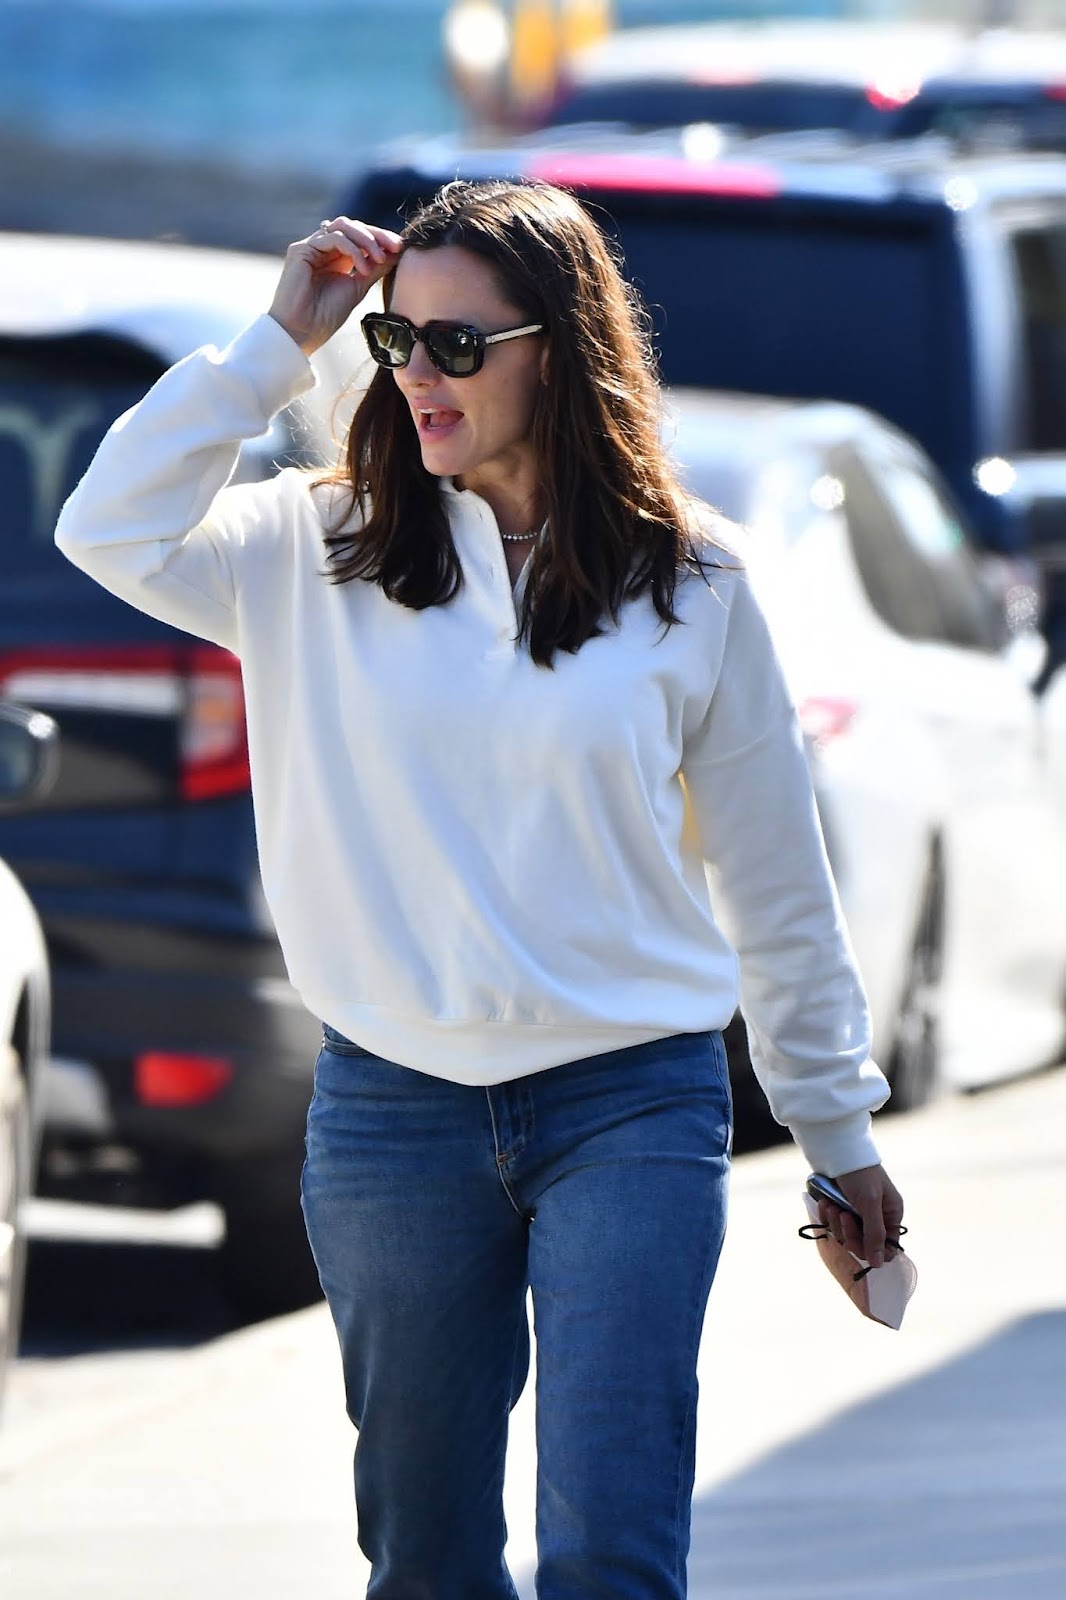 Jennifer Garner was spotted while picking up her son from school in Brentwood